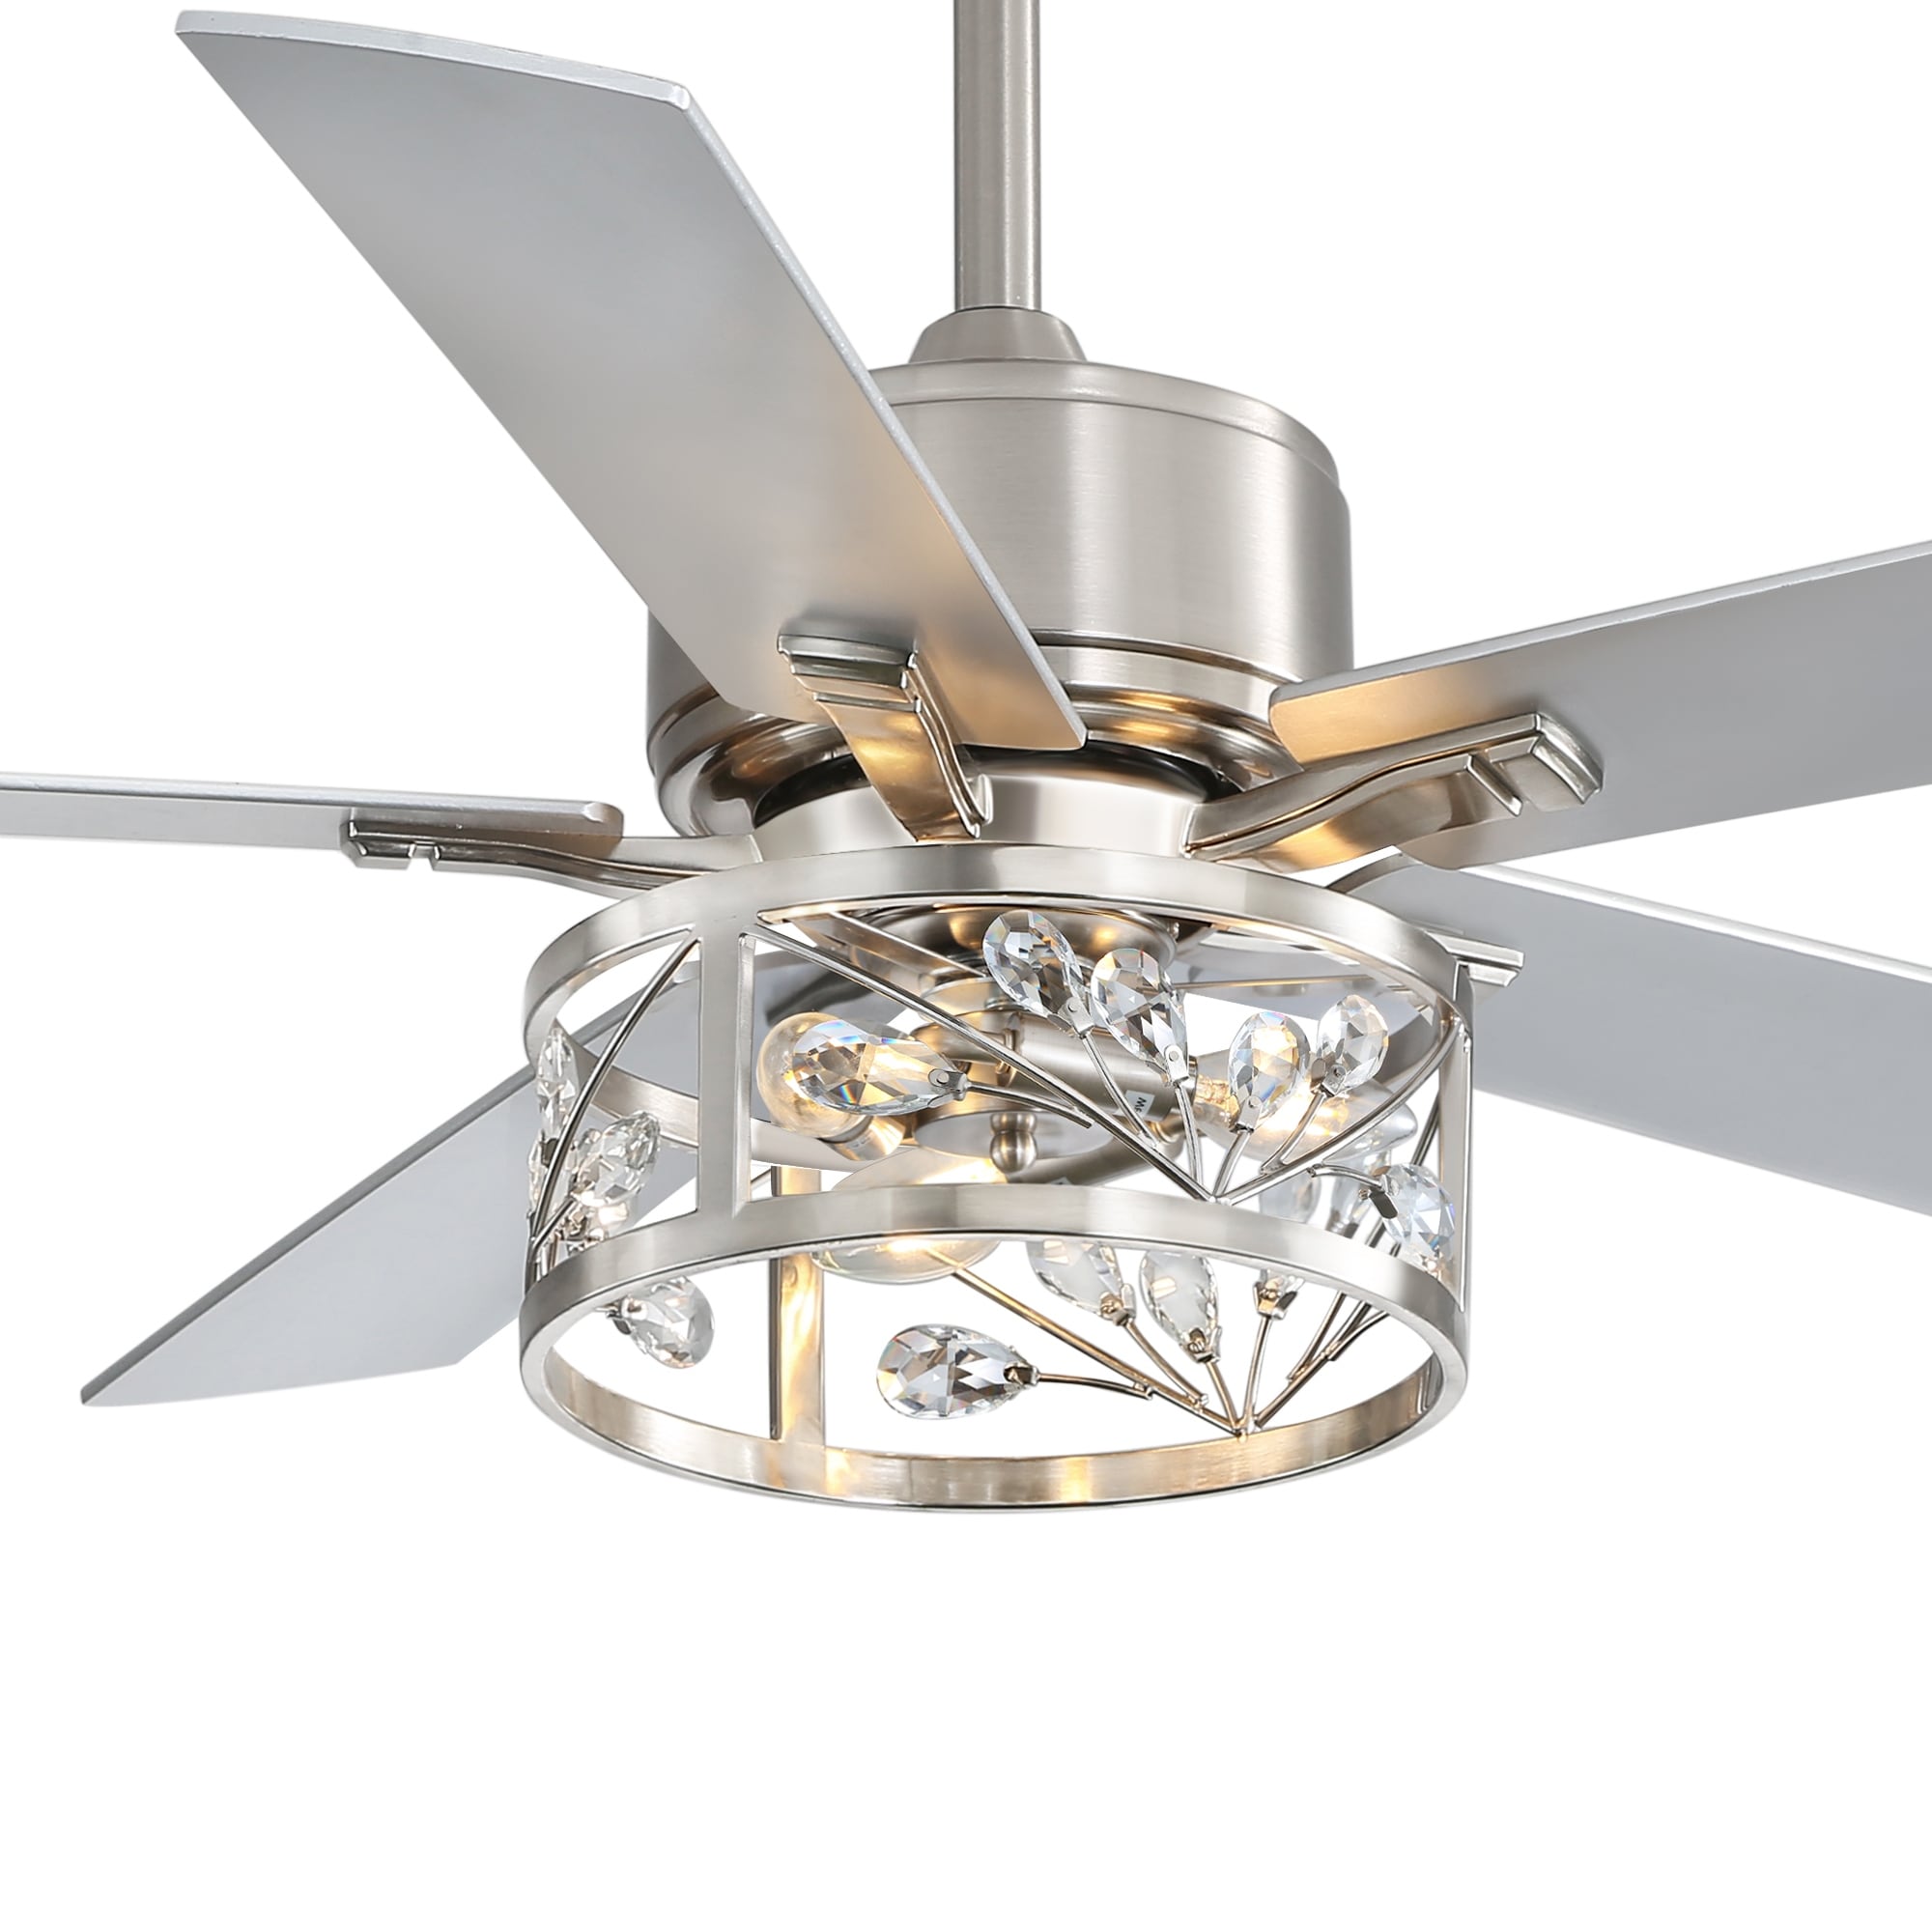 52-in Indoor Satin Nickel Ceiling Fan with Light and Remote(5-Blade) Bed  Bath  Beyond 37353641